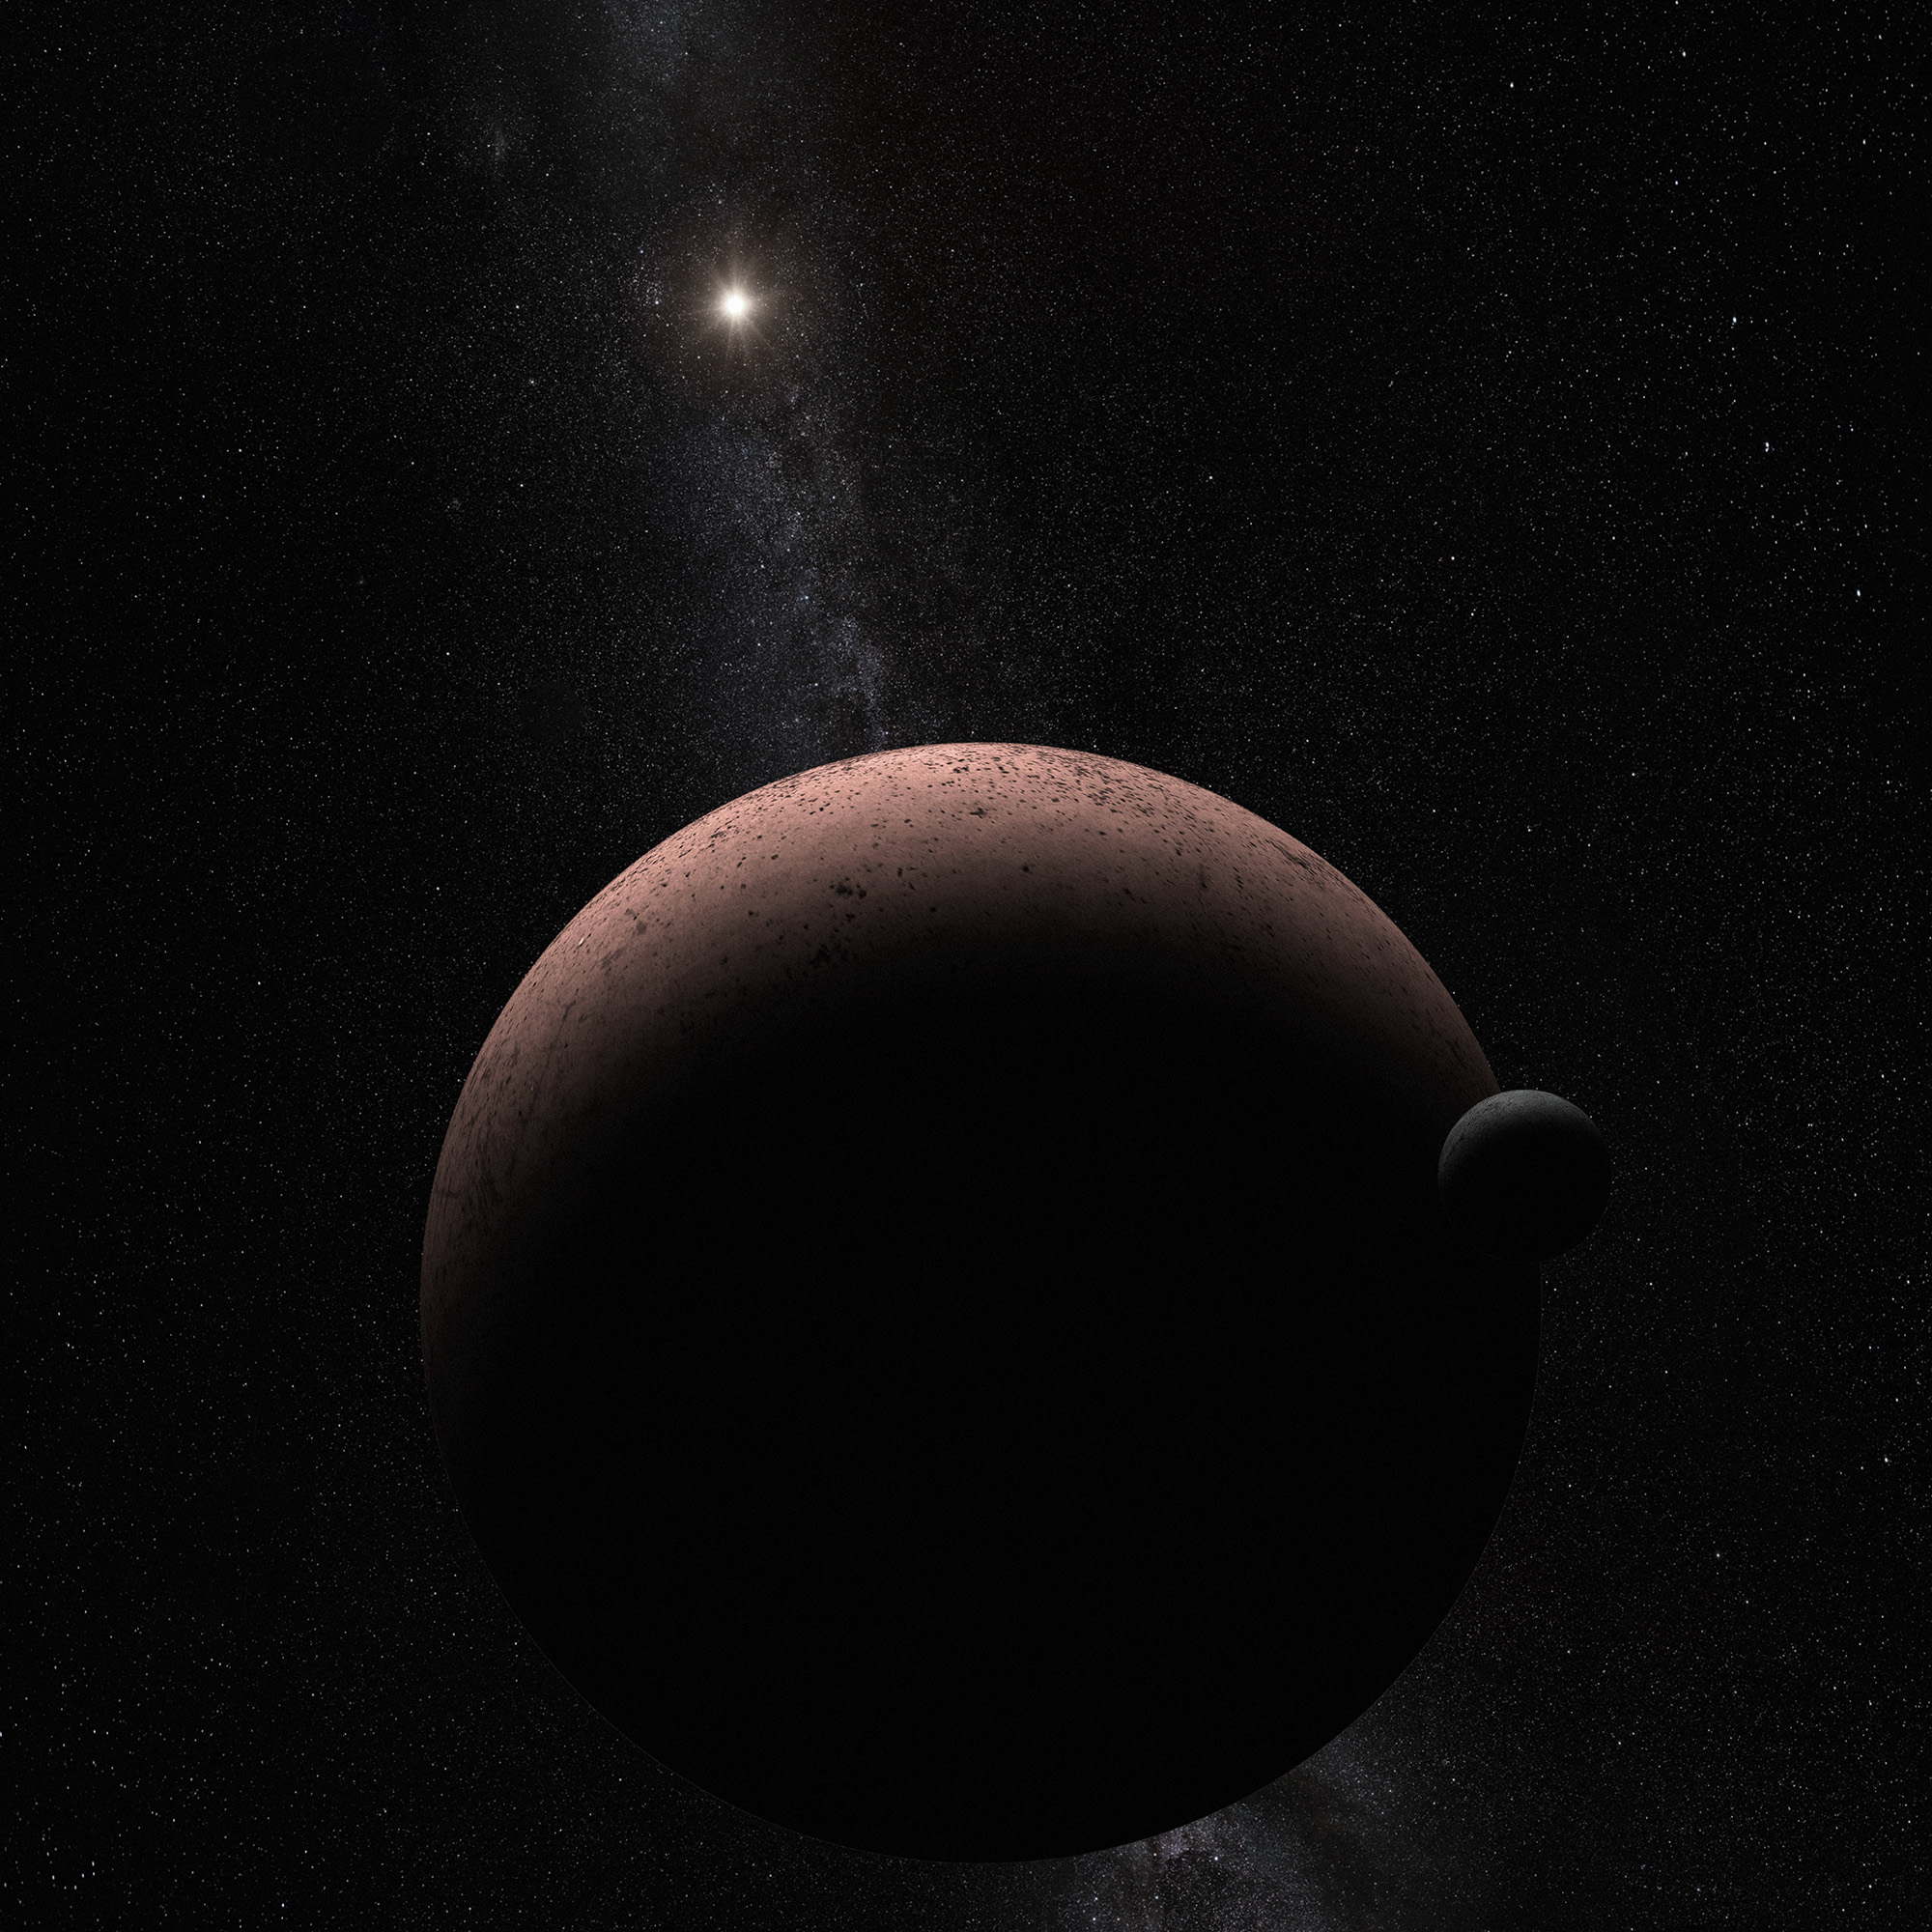 Artist’s illustration of Makemake, a dwarf planet in the Kuiper belt. Nearby is its moon, MK 2. Off in the distance: the Sun.